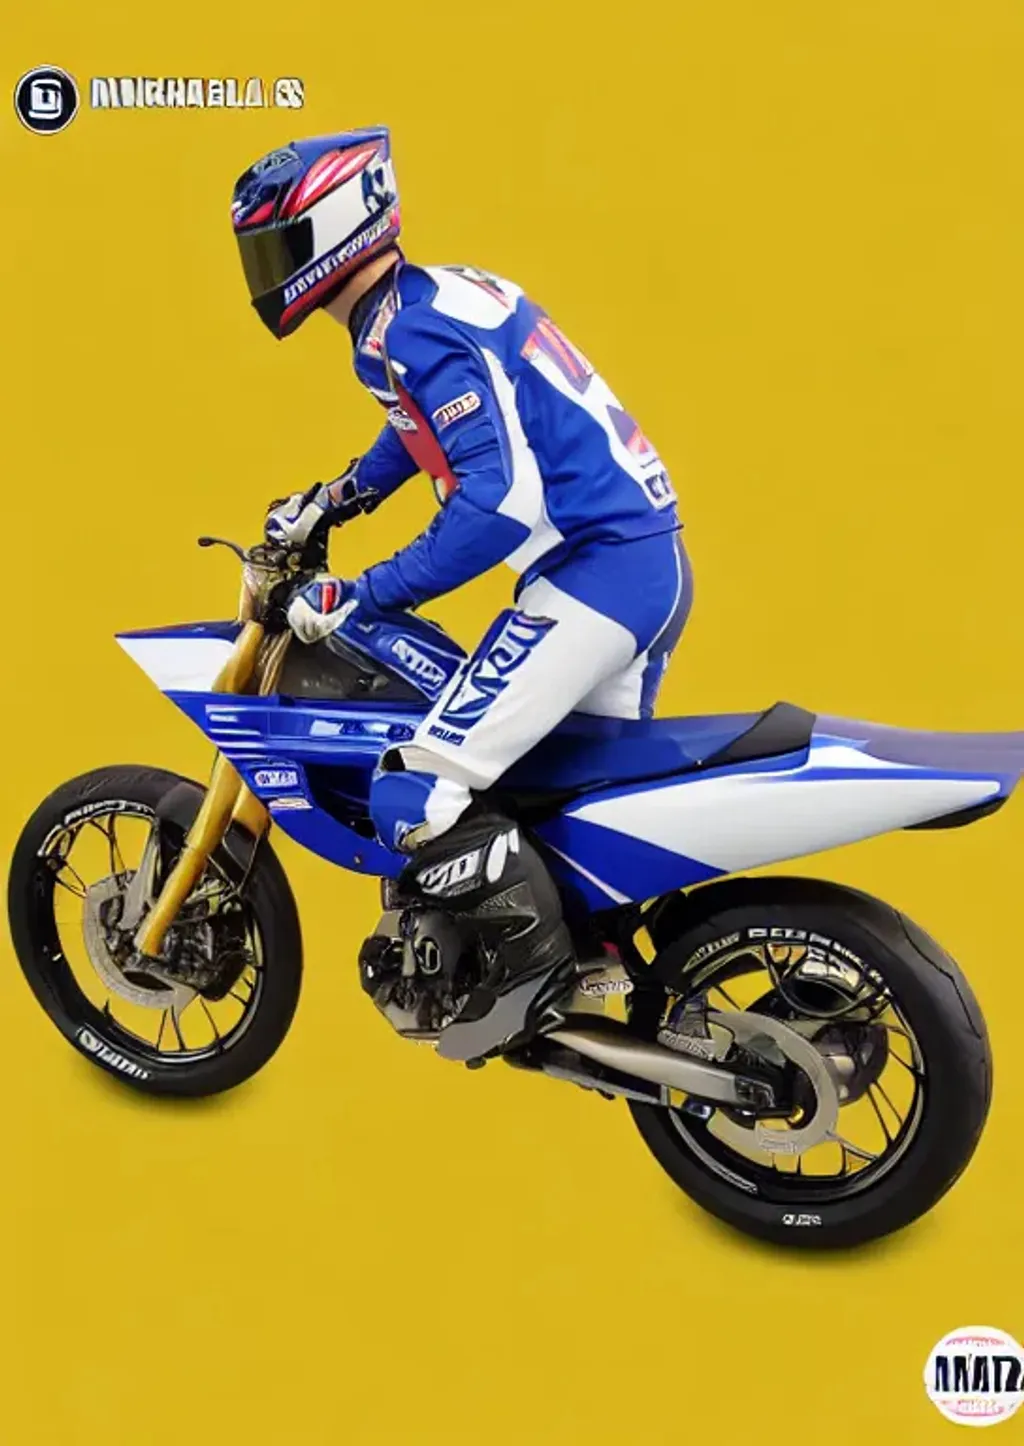 Prompt: Recreate base image in realistic style. Horse. Motorcyclist. Yamaha livery. No variant. Maintain pose.